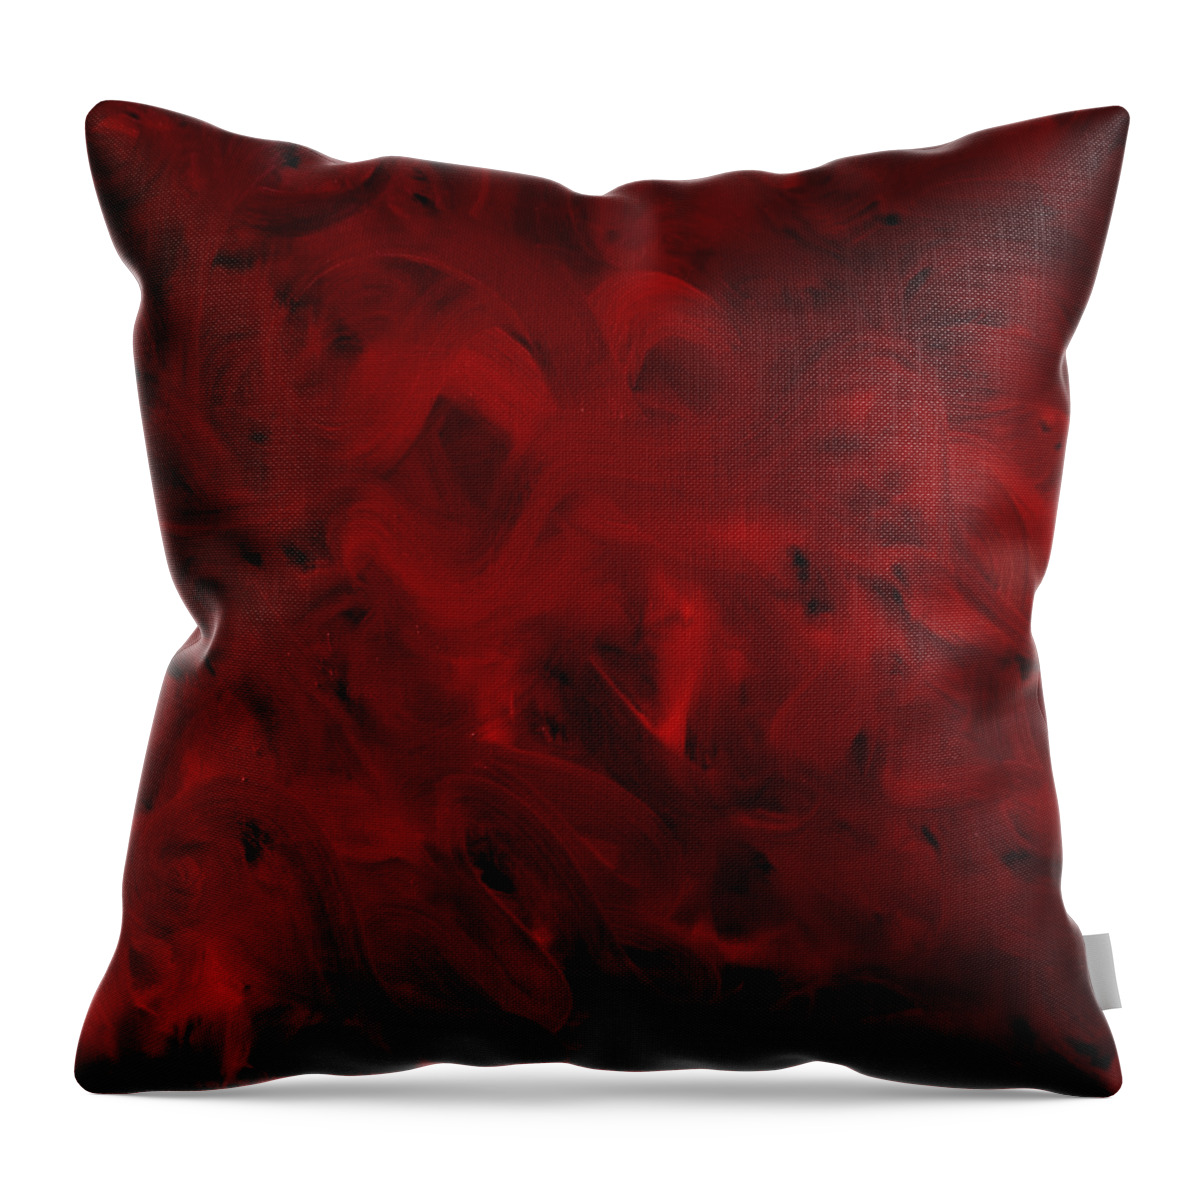 Abstract Throw Pillow featuring the painting Mars Swirl II by Shannon Grissom